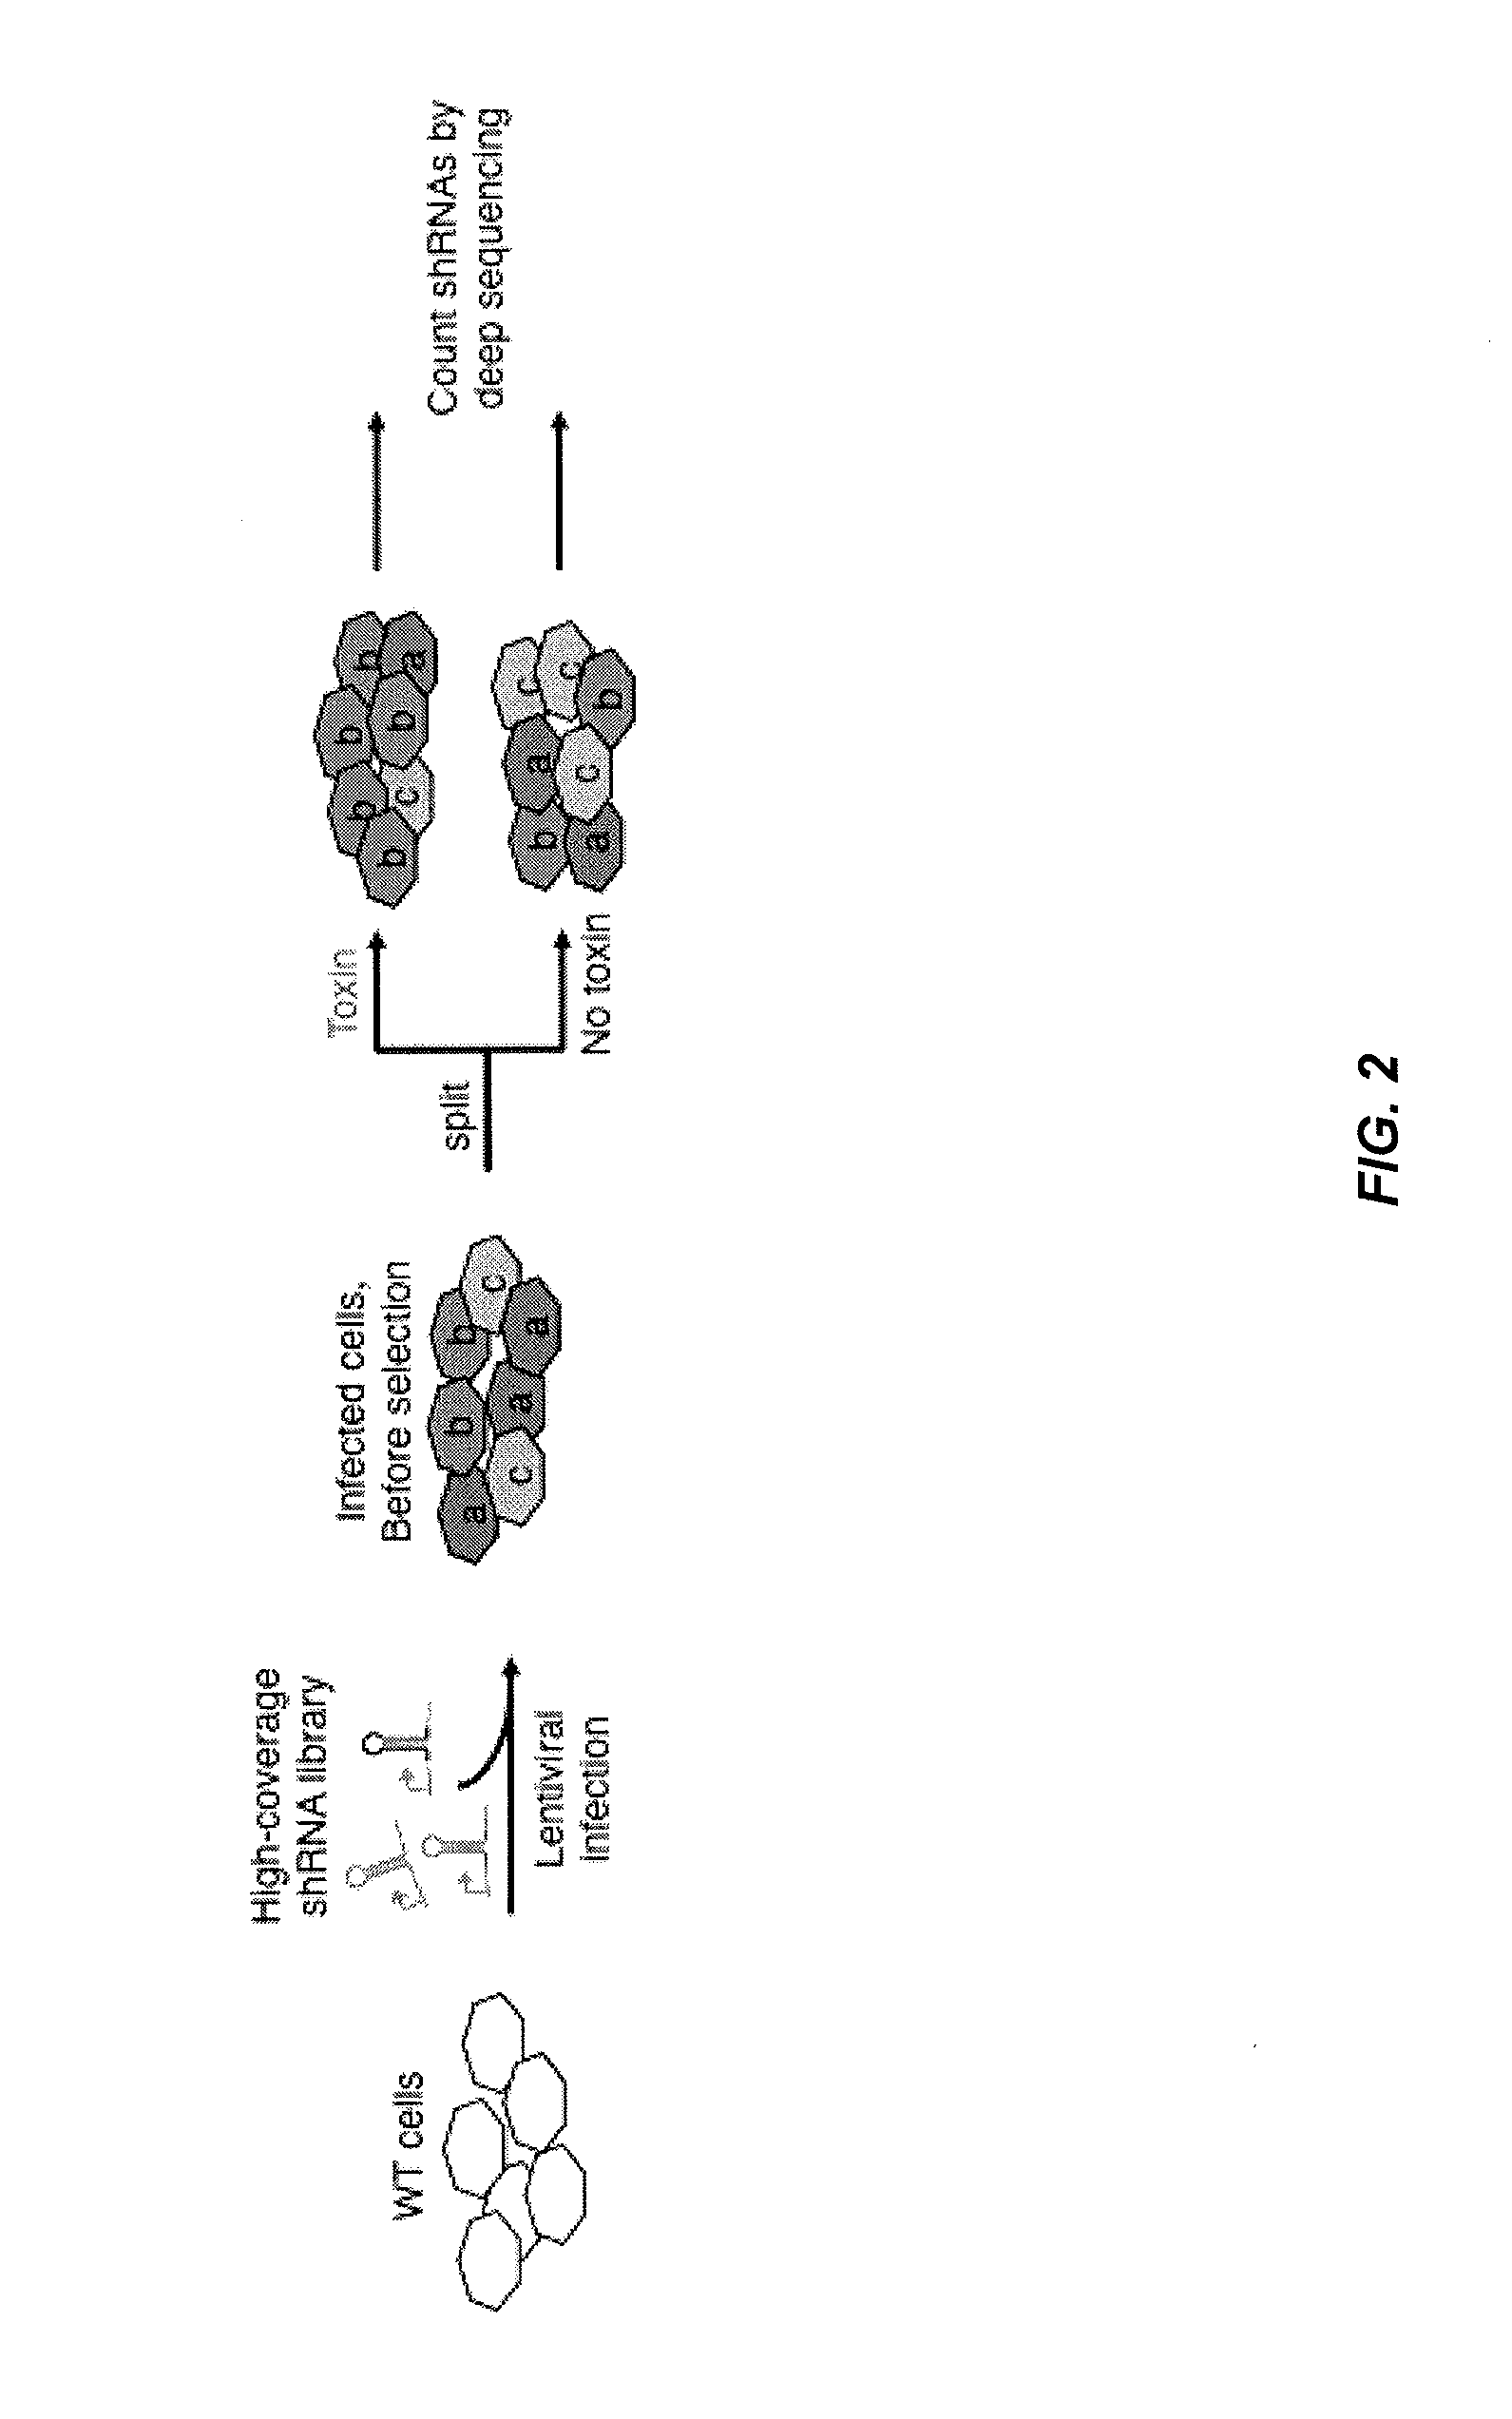 Methods for genome-wide screening and construction of genetic interaction maps